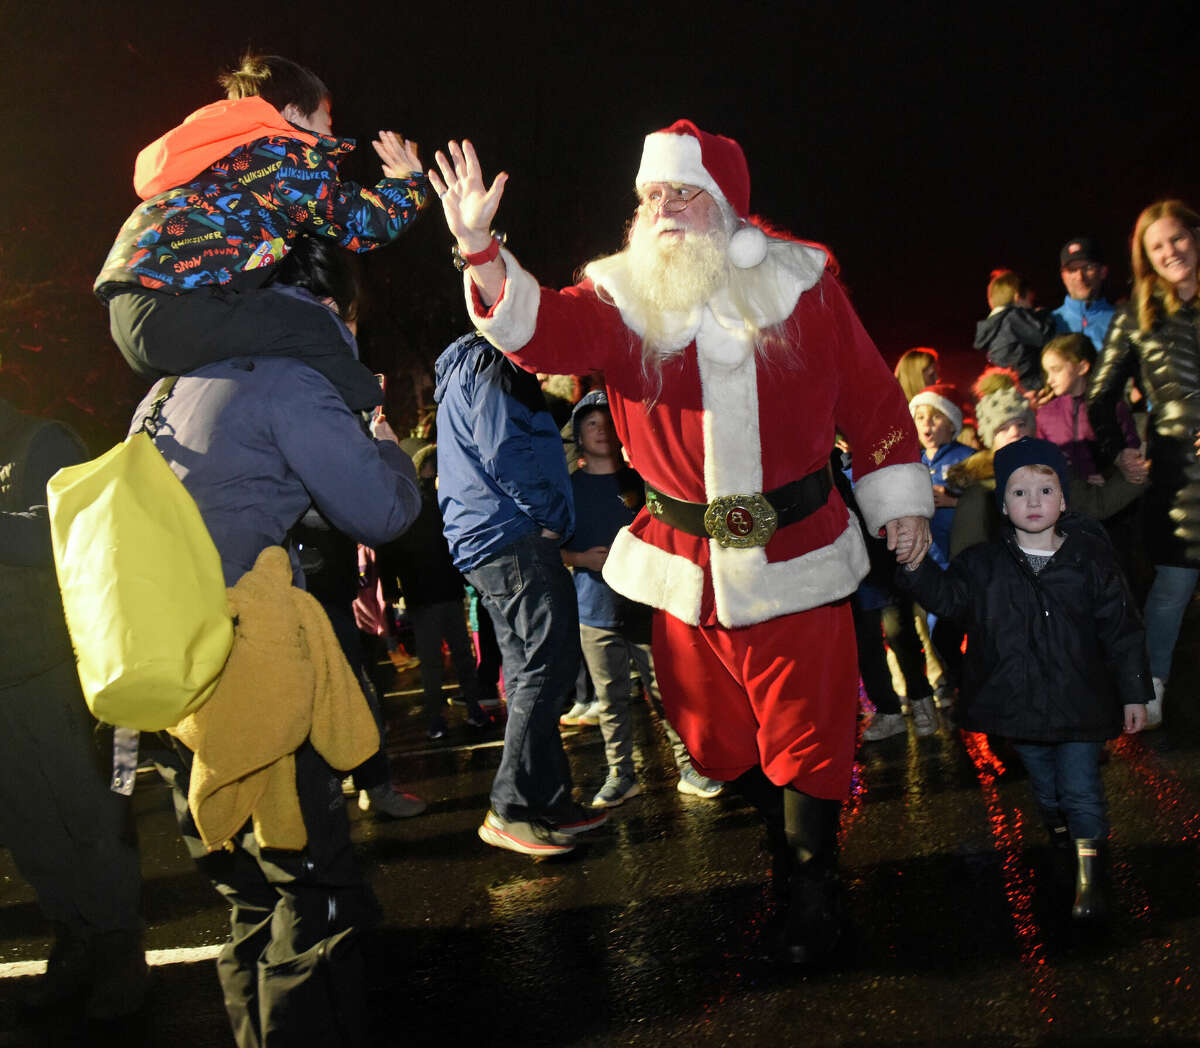 Santa Claus arrives to the annual Christmas tree lighting ceremony outside Darien Sport Shop in Darien, Conn. Sunday, Nov. 27, 2022. Santa arrived in the rain Sunday to help light the Christmas tree and pose for photos with children afterwards.